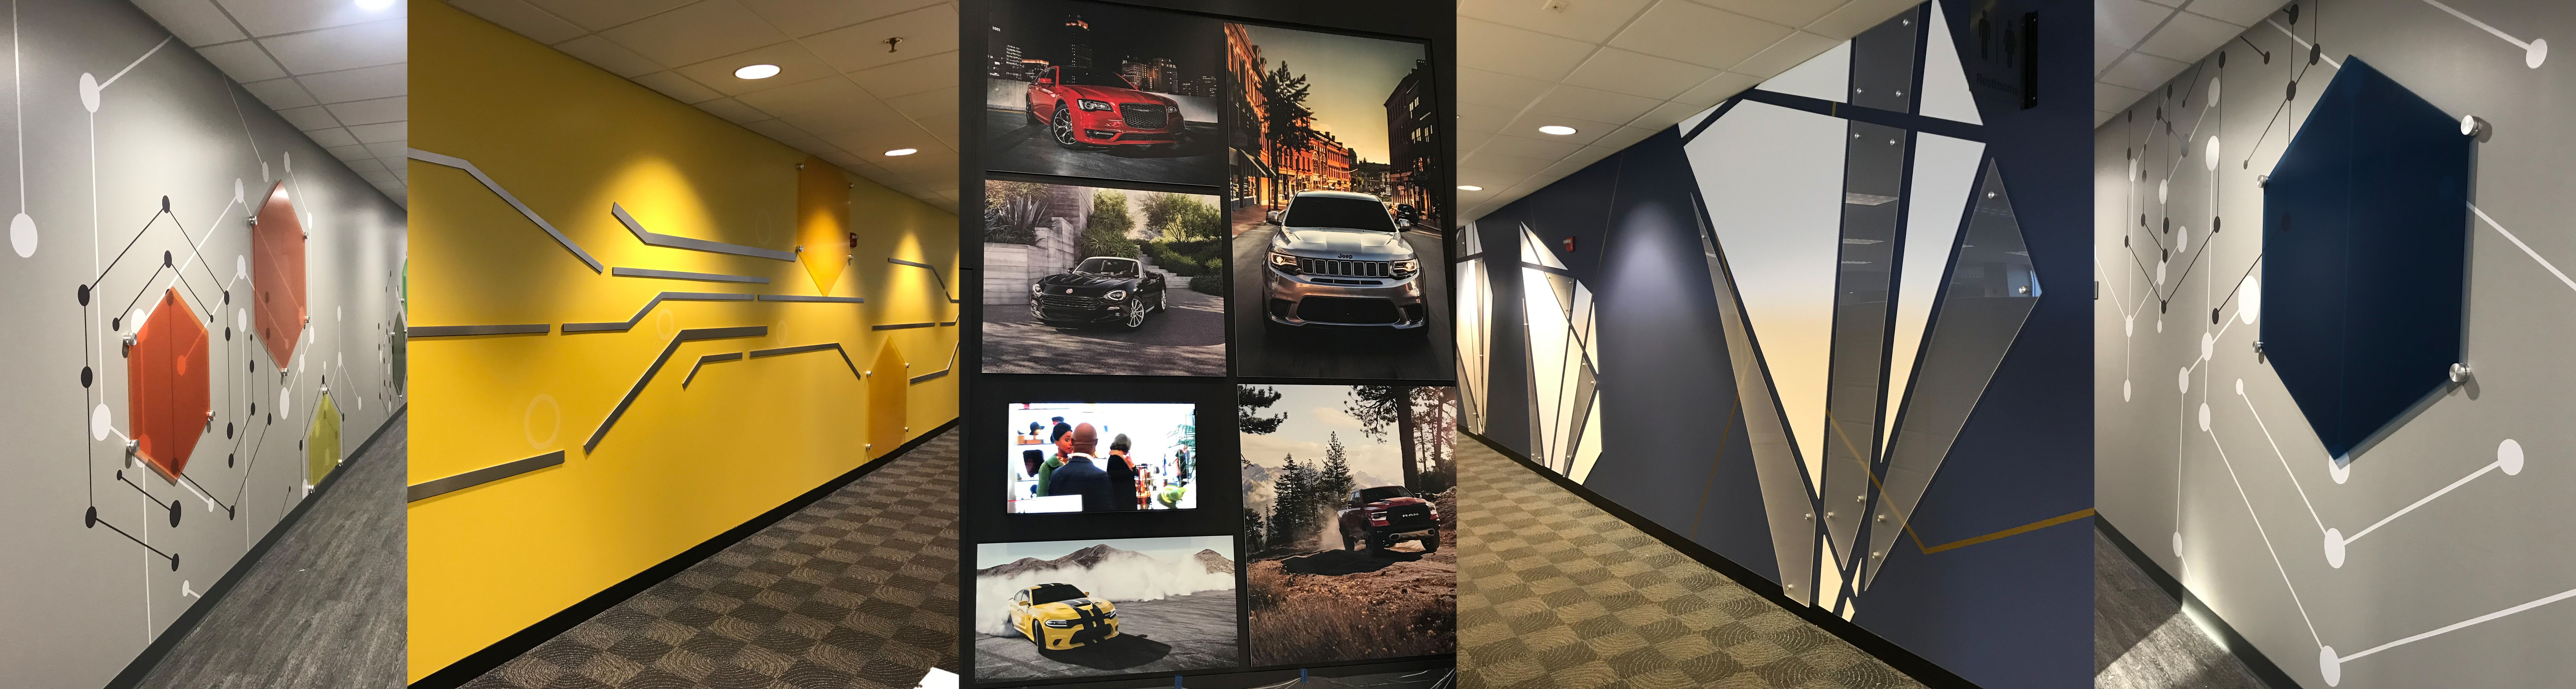 Experiential graphic design at Fiat Chrysler Automotive Facility